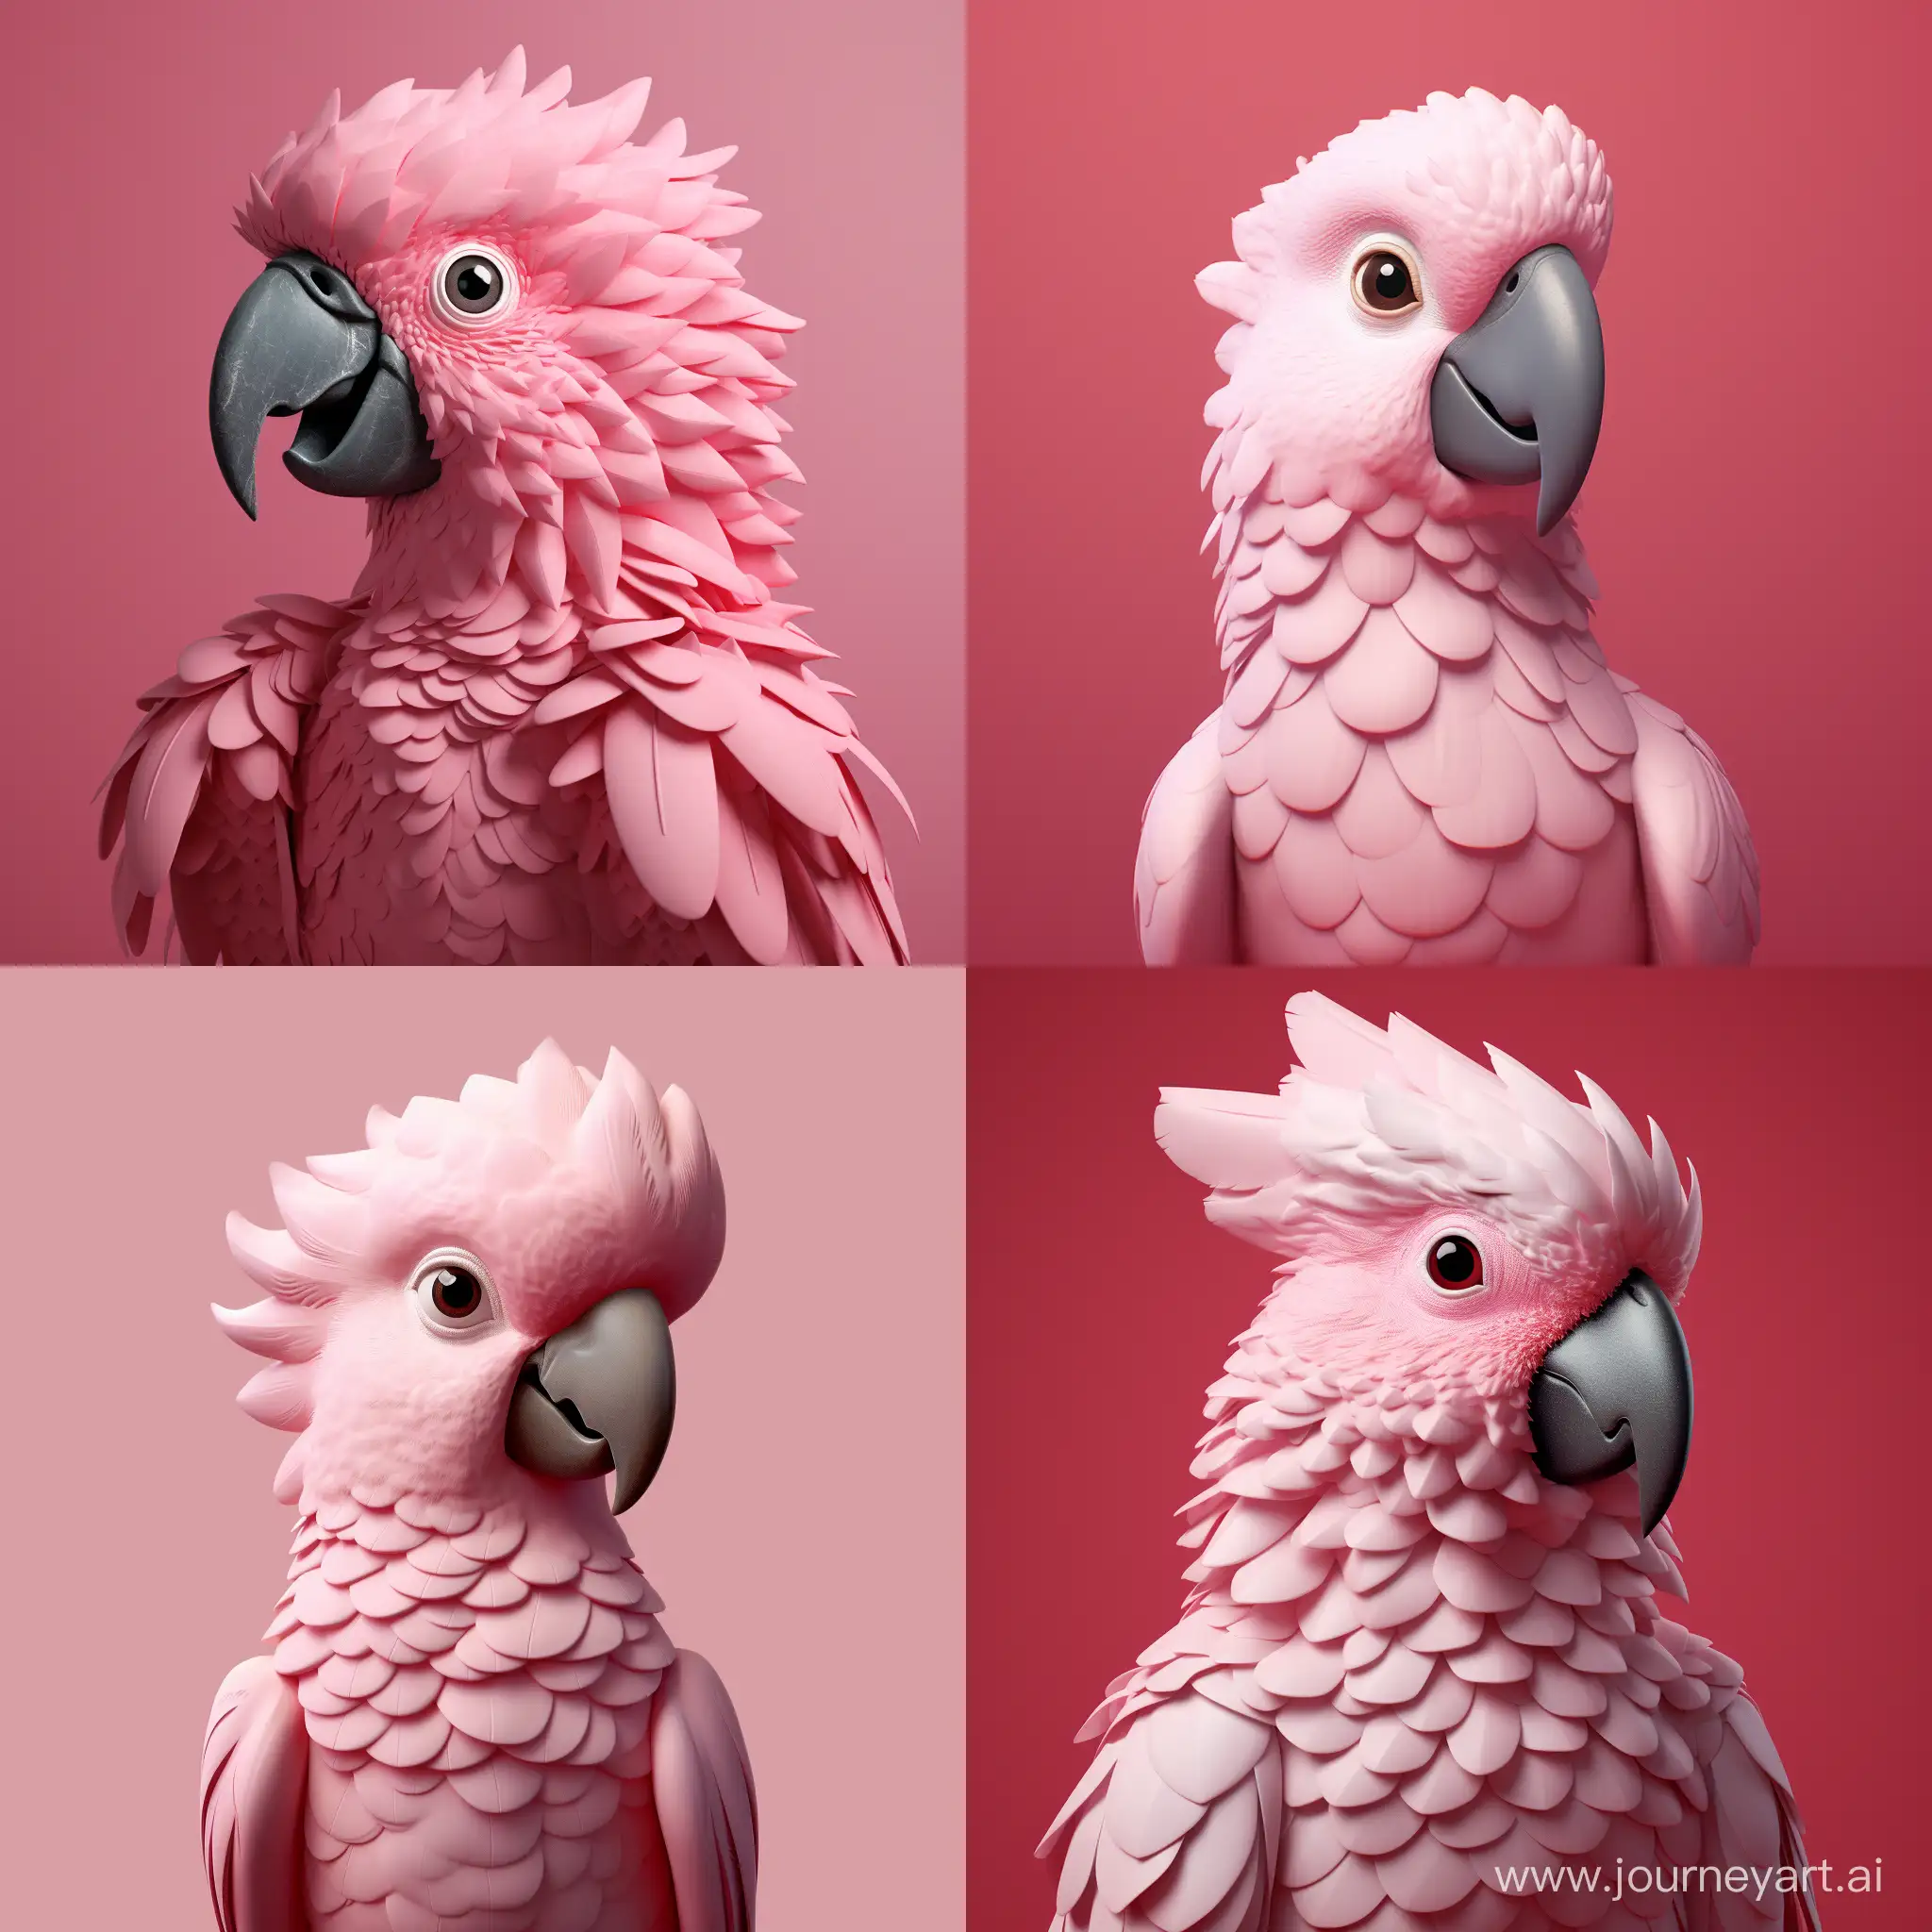 Vibrant-Pink-Cockatoo-in-Disney-Pixar-3D-Style-on-Muted-Solid-Color-Background